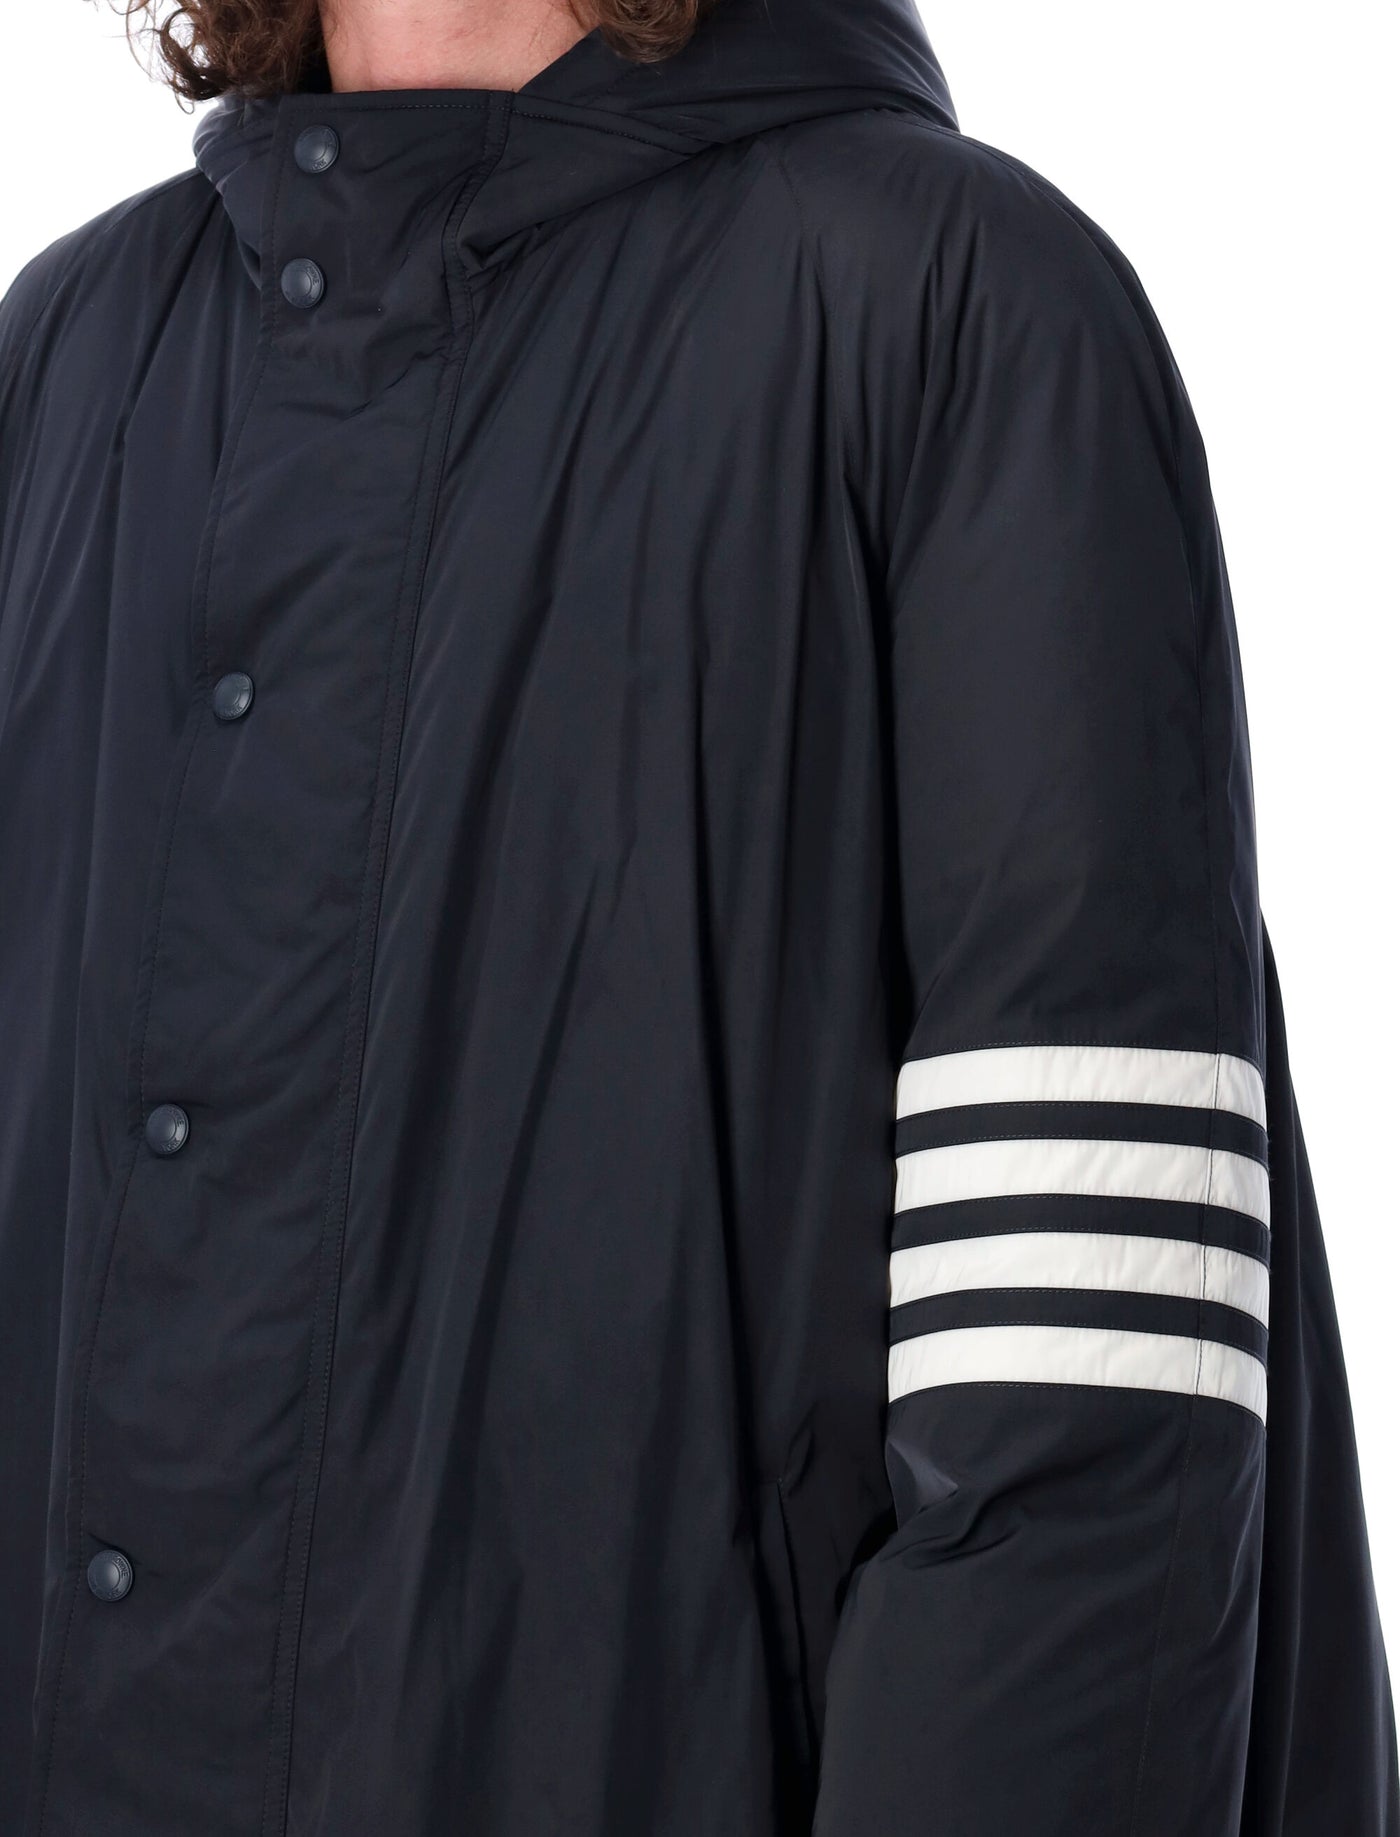 4-BAR Sideline Football Parka - Stay Warm on the Sidelines